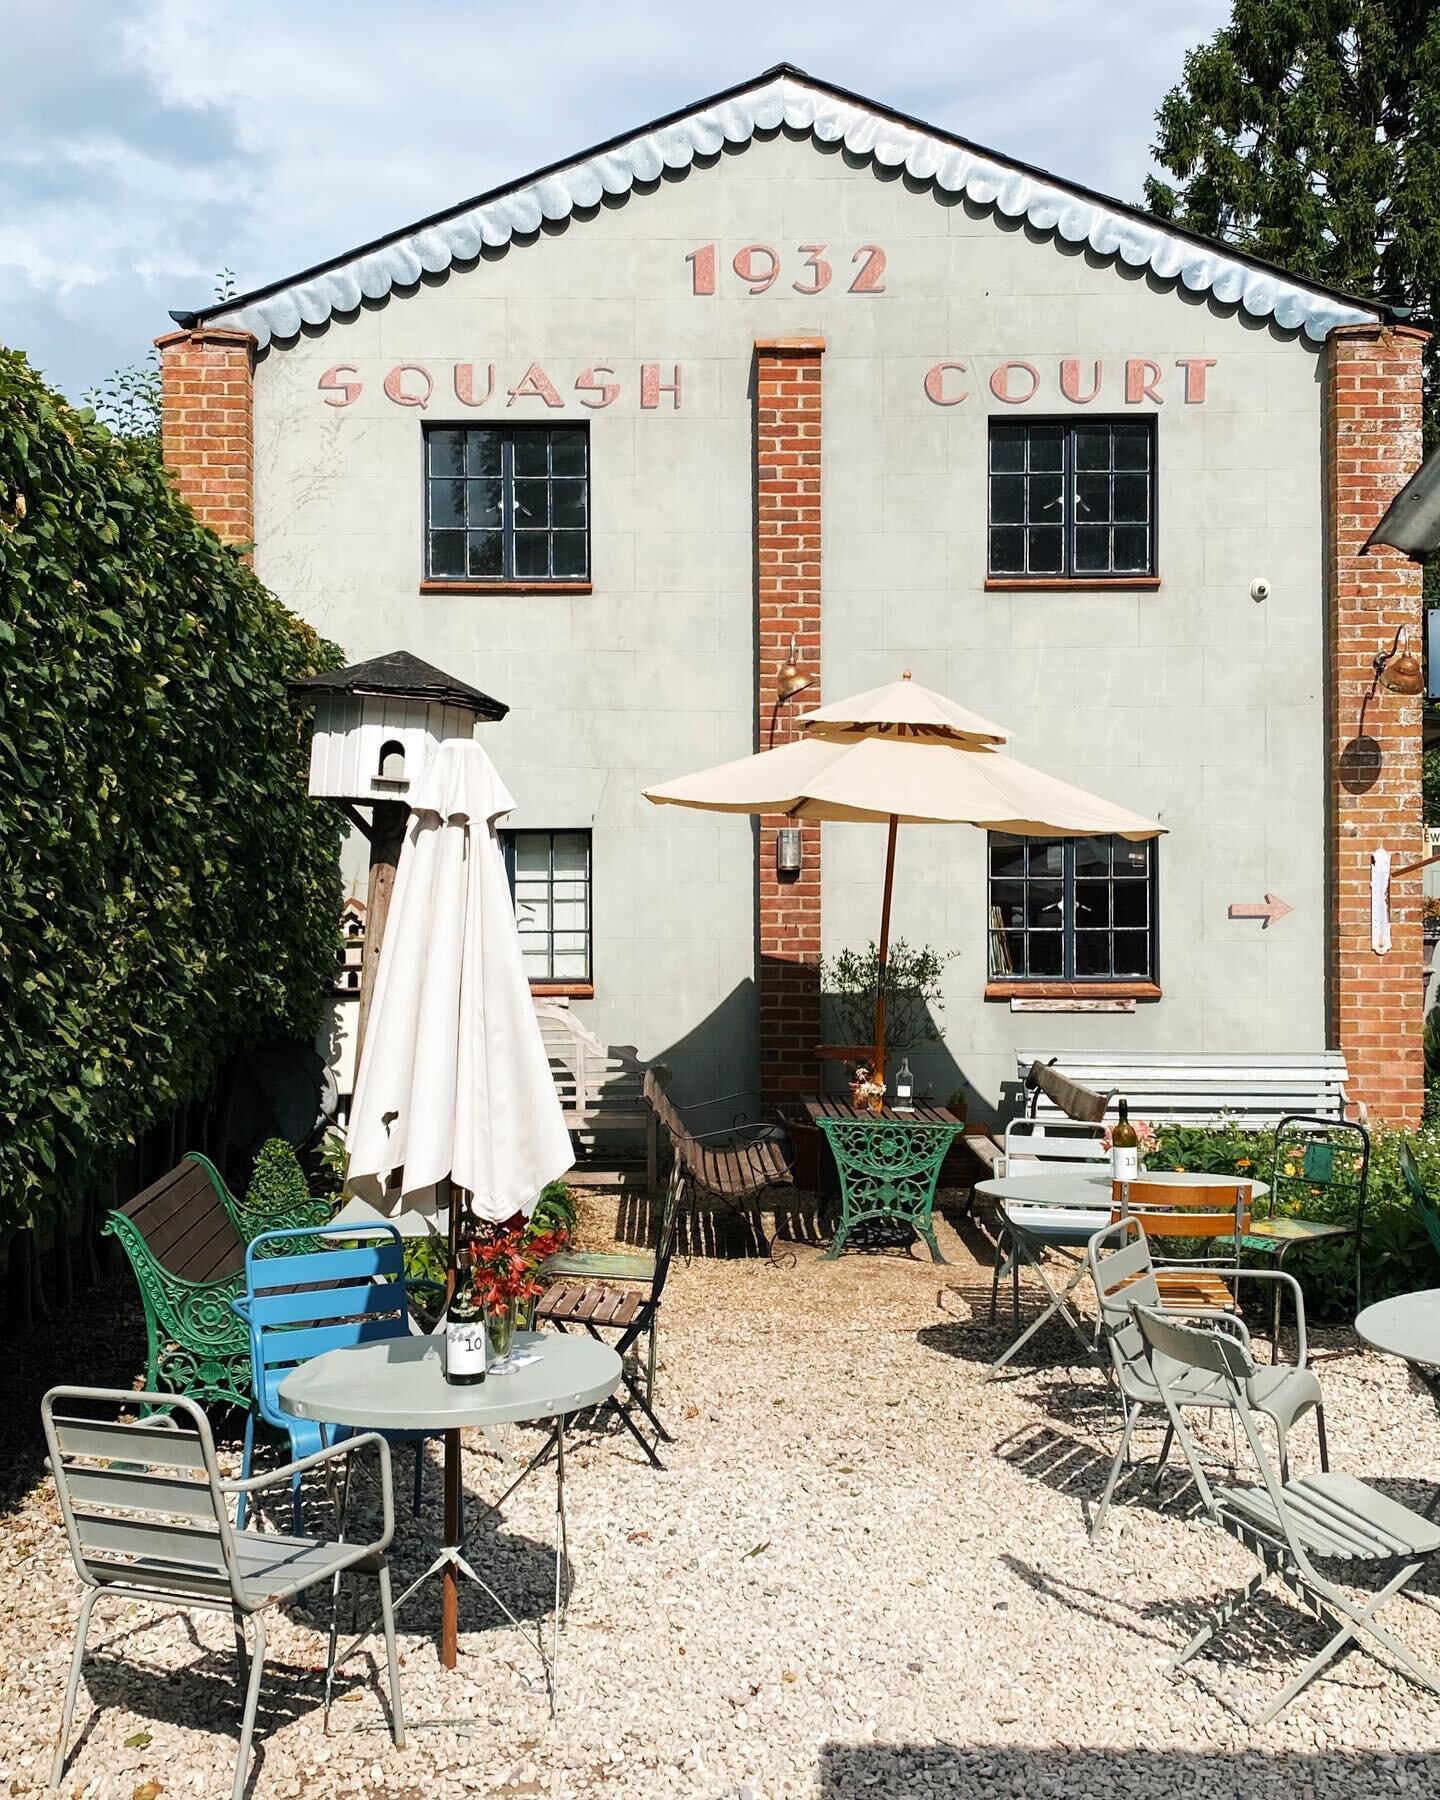 The weather is set to be gorgeous this weekend! So the coffee&rsquo;s on (@badhandcoffee of course!), the courtyard&rsquo;s ready and the cakes are baked! We&rsquo;re open all weekend 10am - 4pm so do pop in to see us, and don&rsquo;t forget a visit 